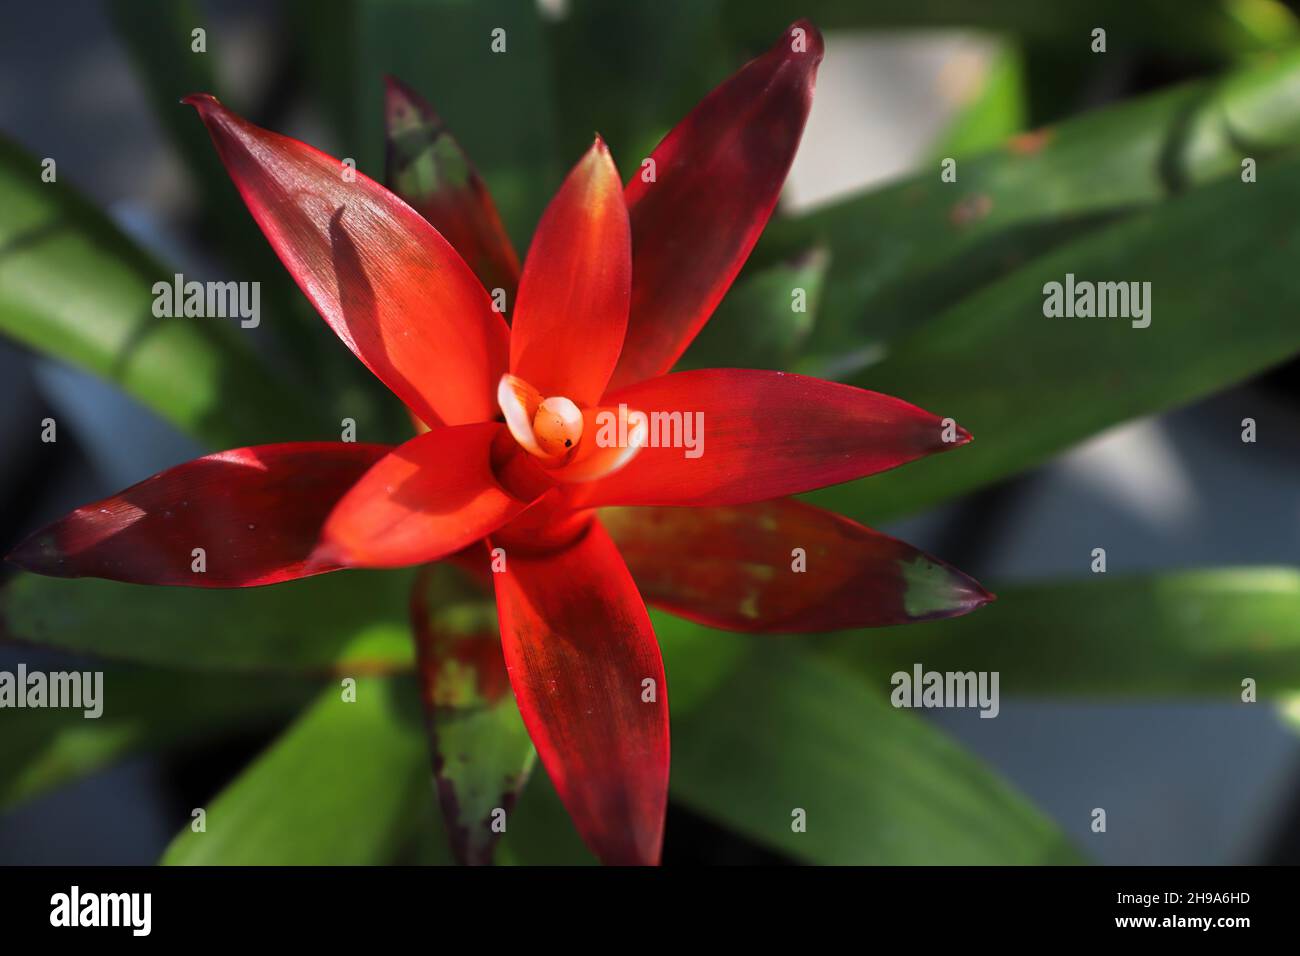 Closeup top view of red bromeliad leaf stalks Stock Photo